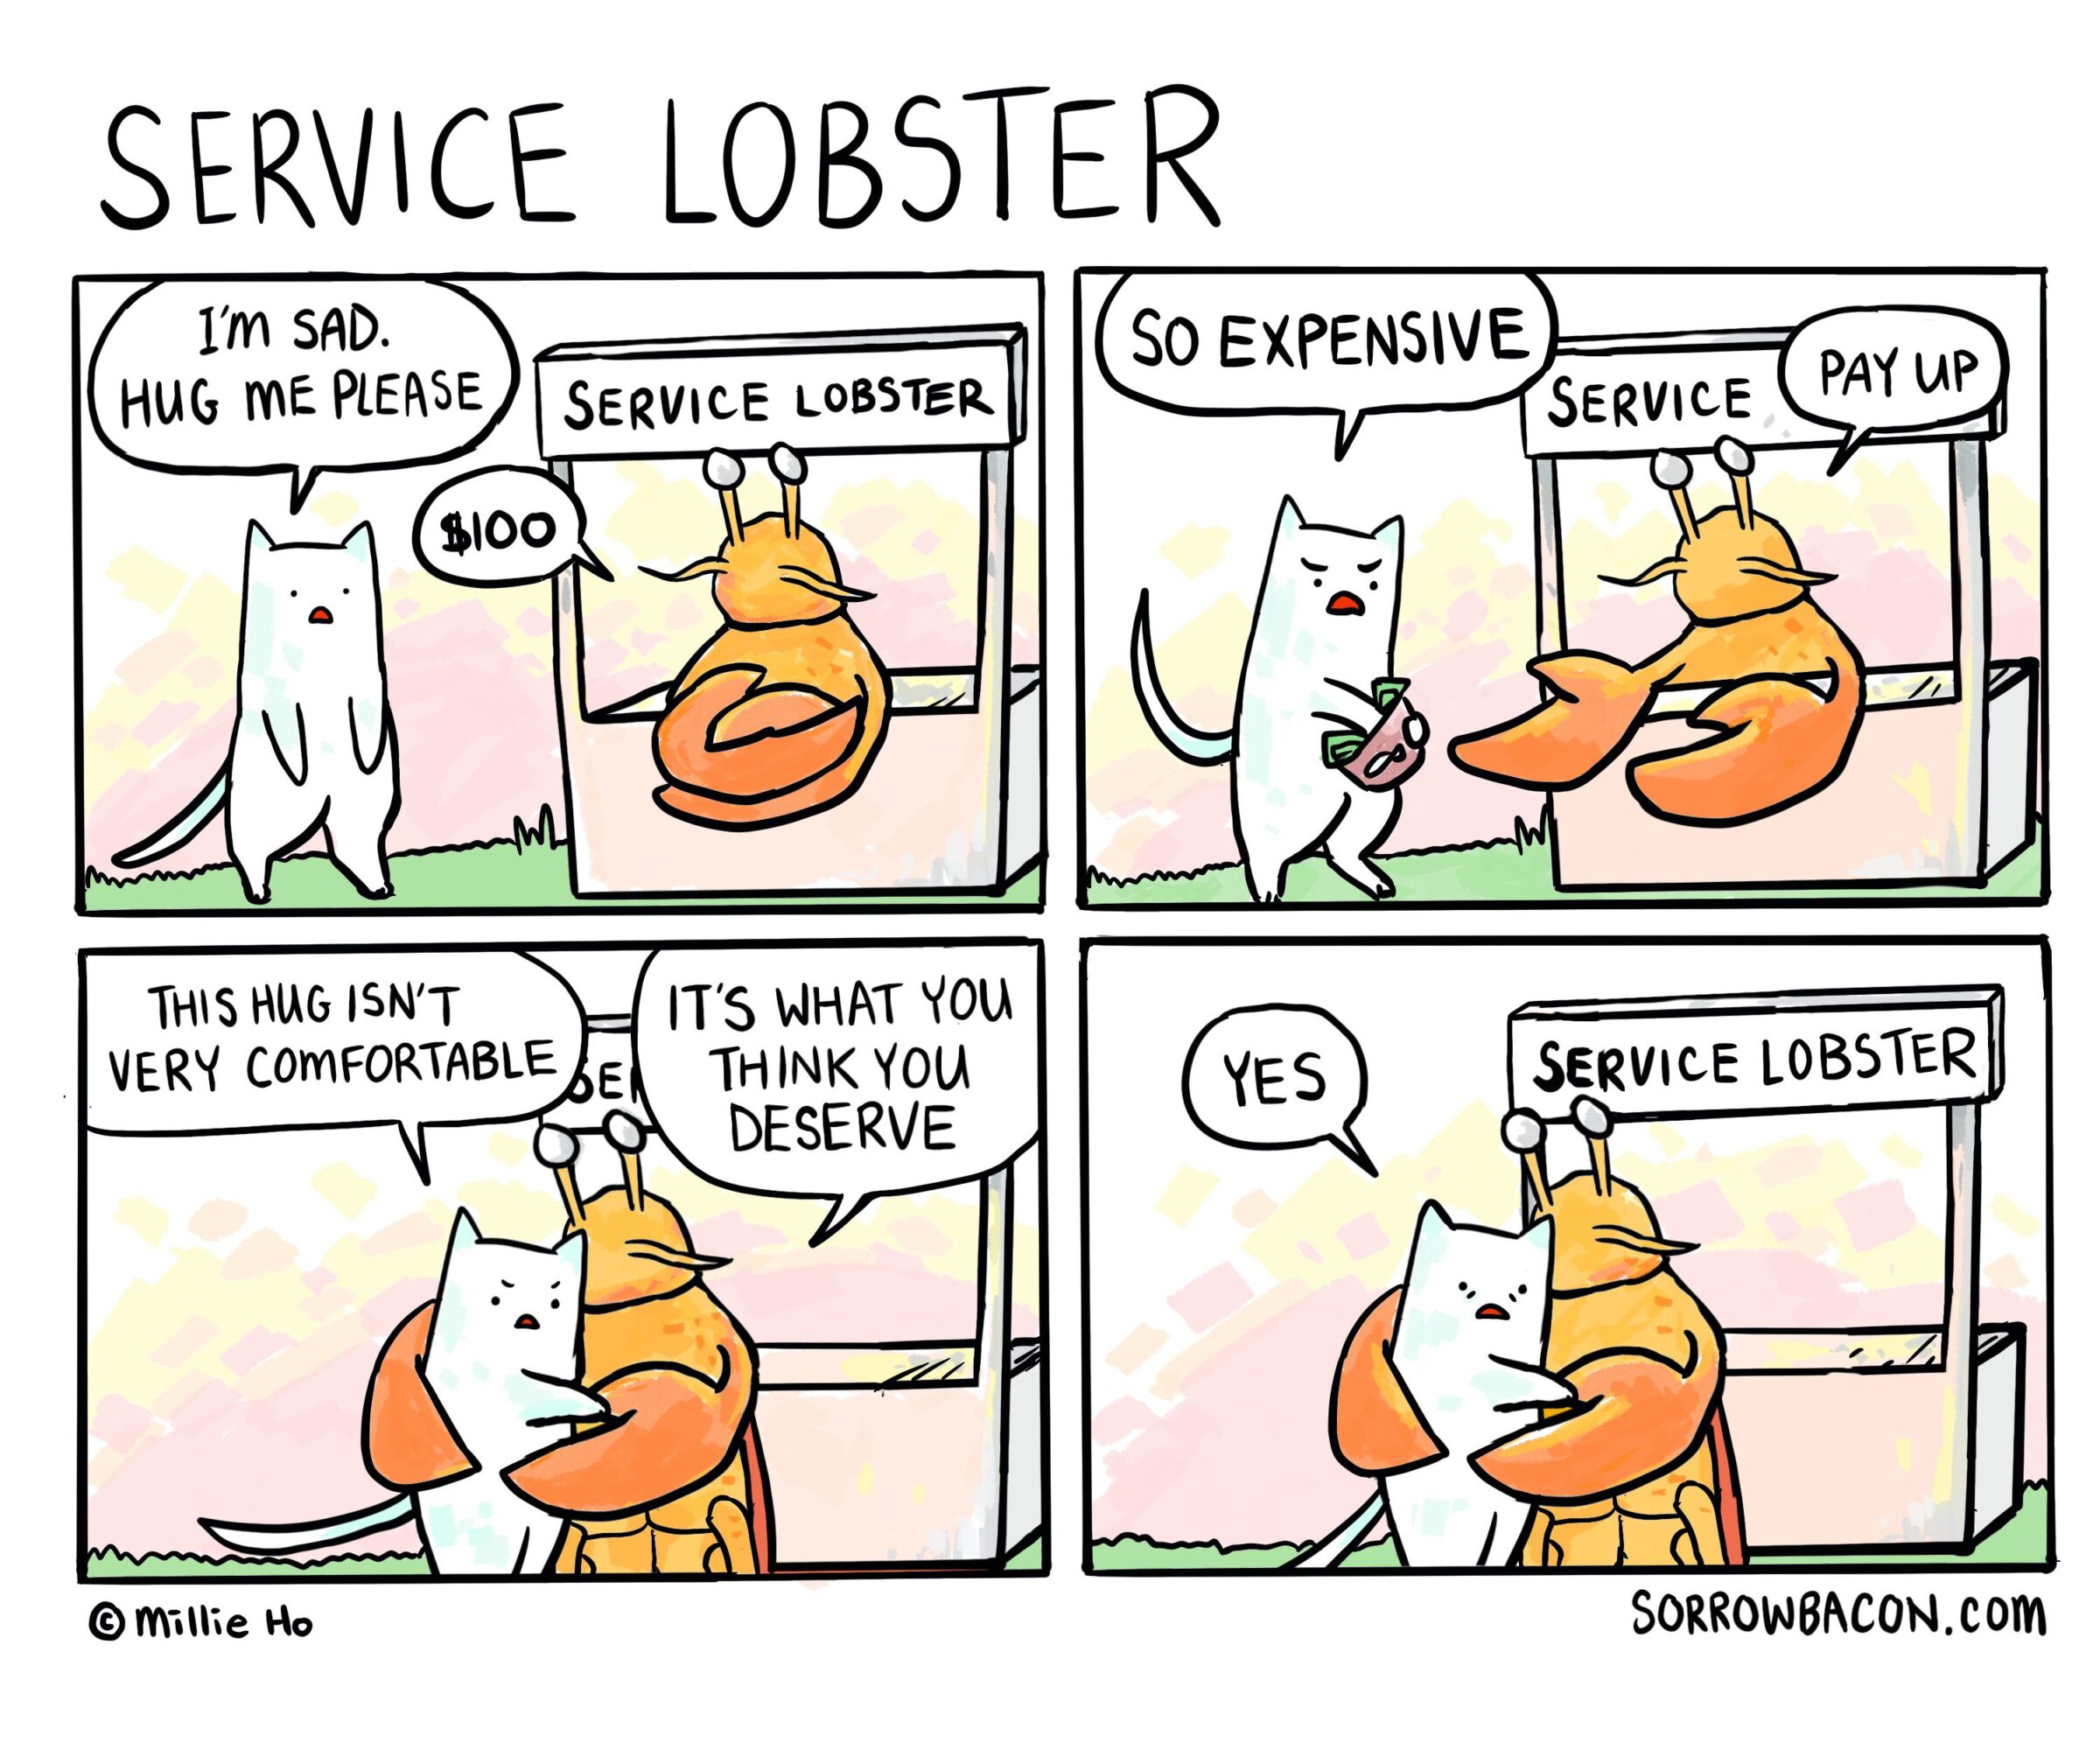 Service lobster, Service Lobster Comics Service lobster, Service Lobster text: SERVICE LOBSTER I'm so. PLEASE SERVICE LOBSTER $100 IT's WHAT You THIS HIRC, ISN'T VERY COmFORTABLE E You DESERVE @ Ho SO EXPENSIVE YES PAY up SERVICE SERVICE LOBSTER SORROW8ACON.com 